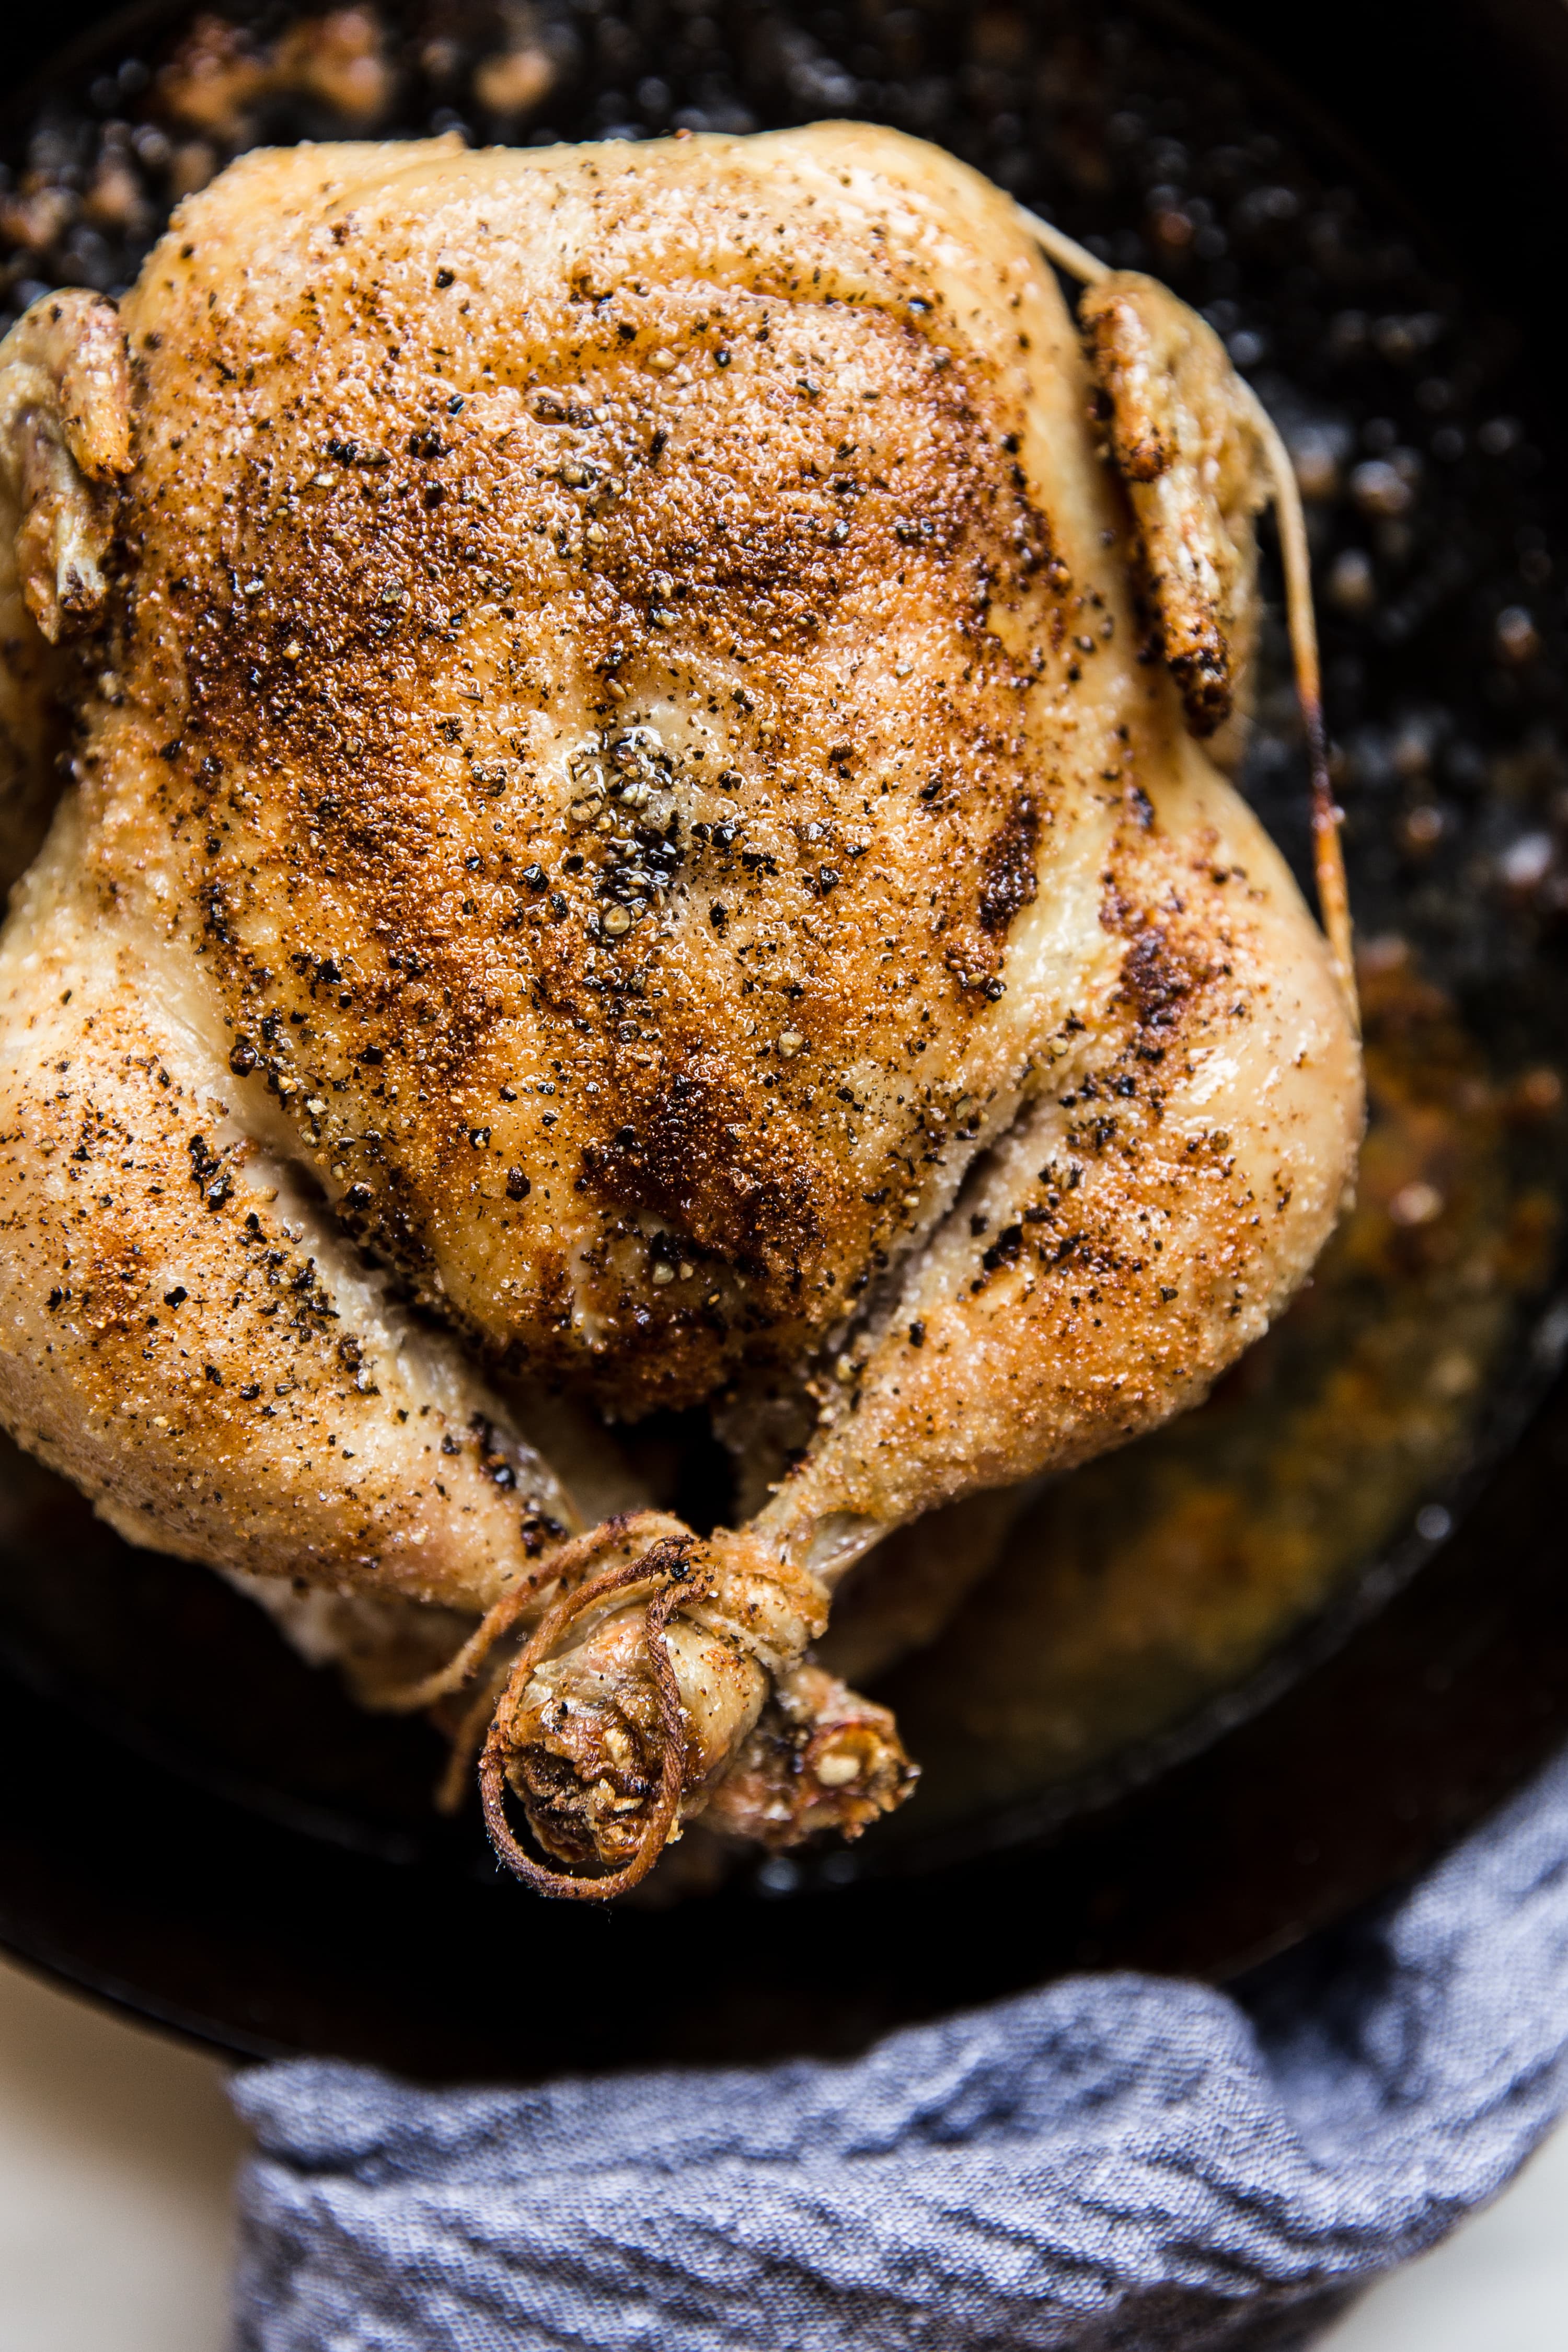 whole roasted chicken in a cast iron skillet